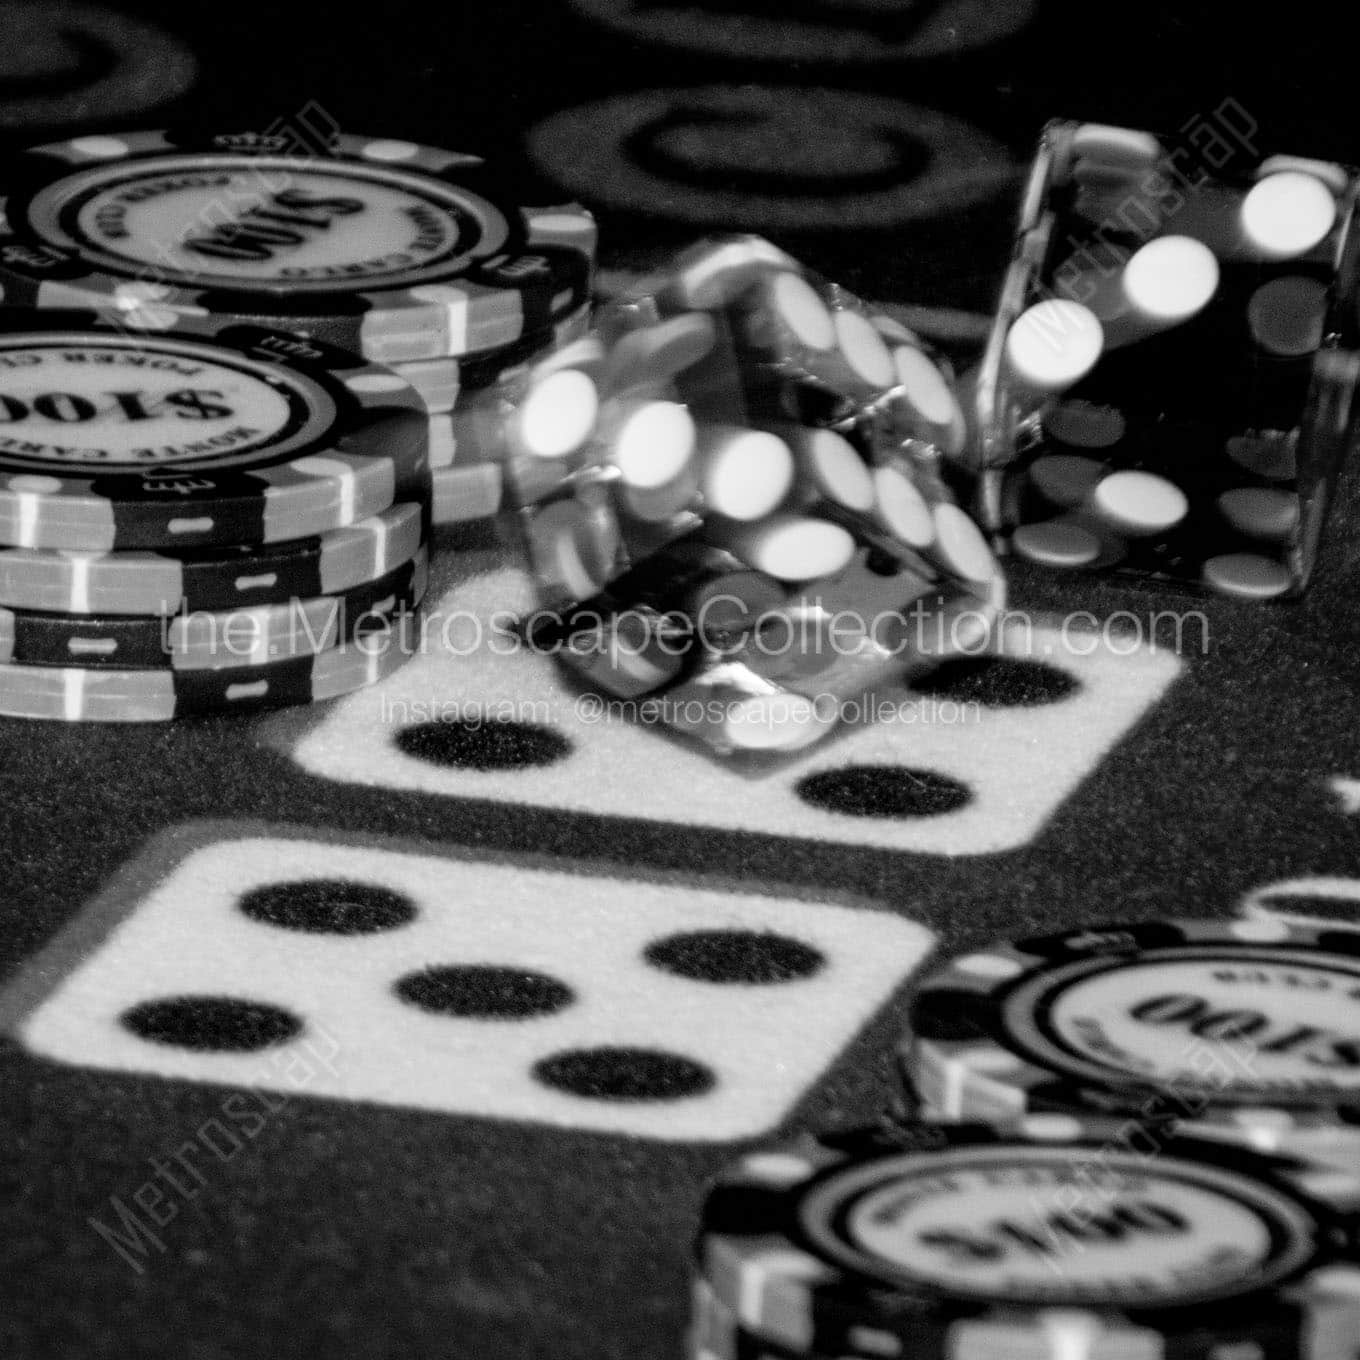 craps table rolling dice Black & White Wall Art